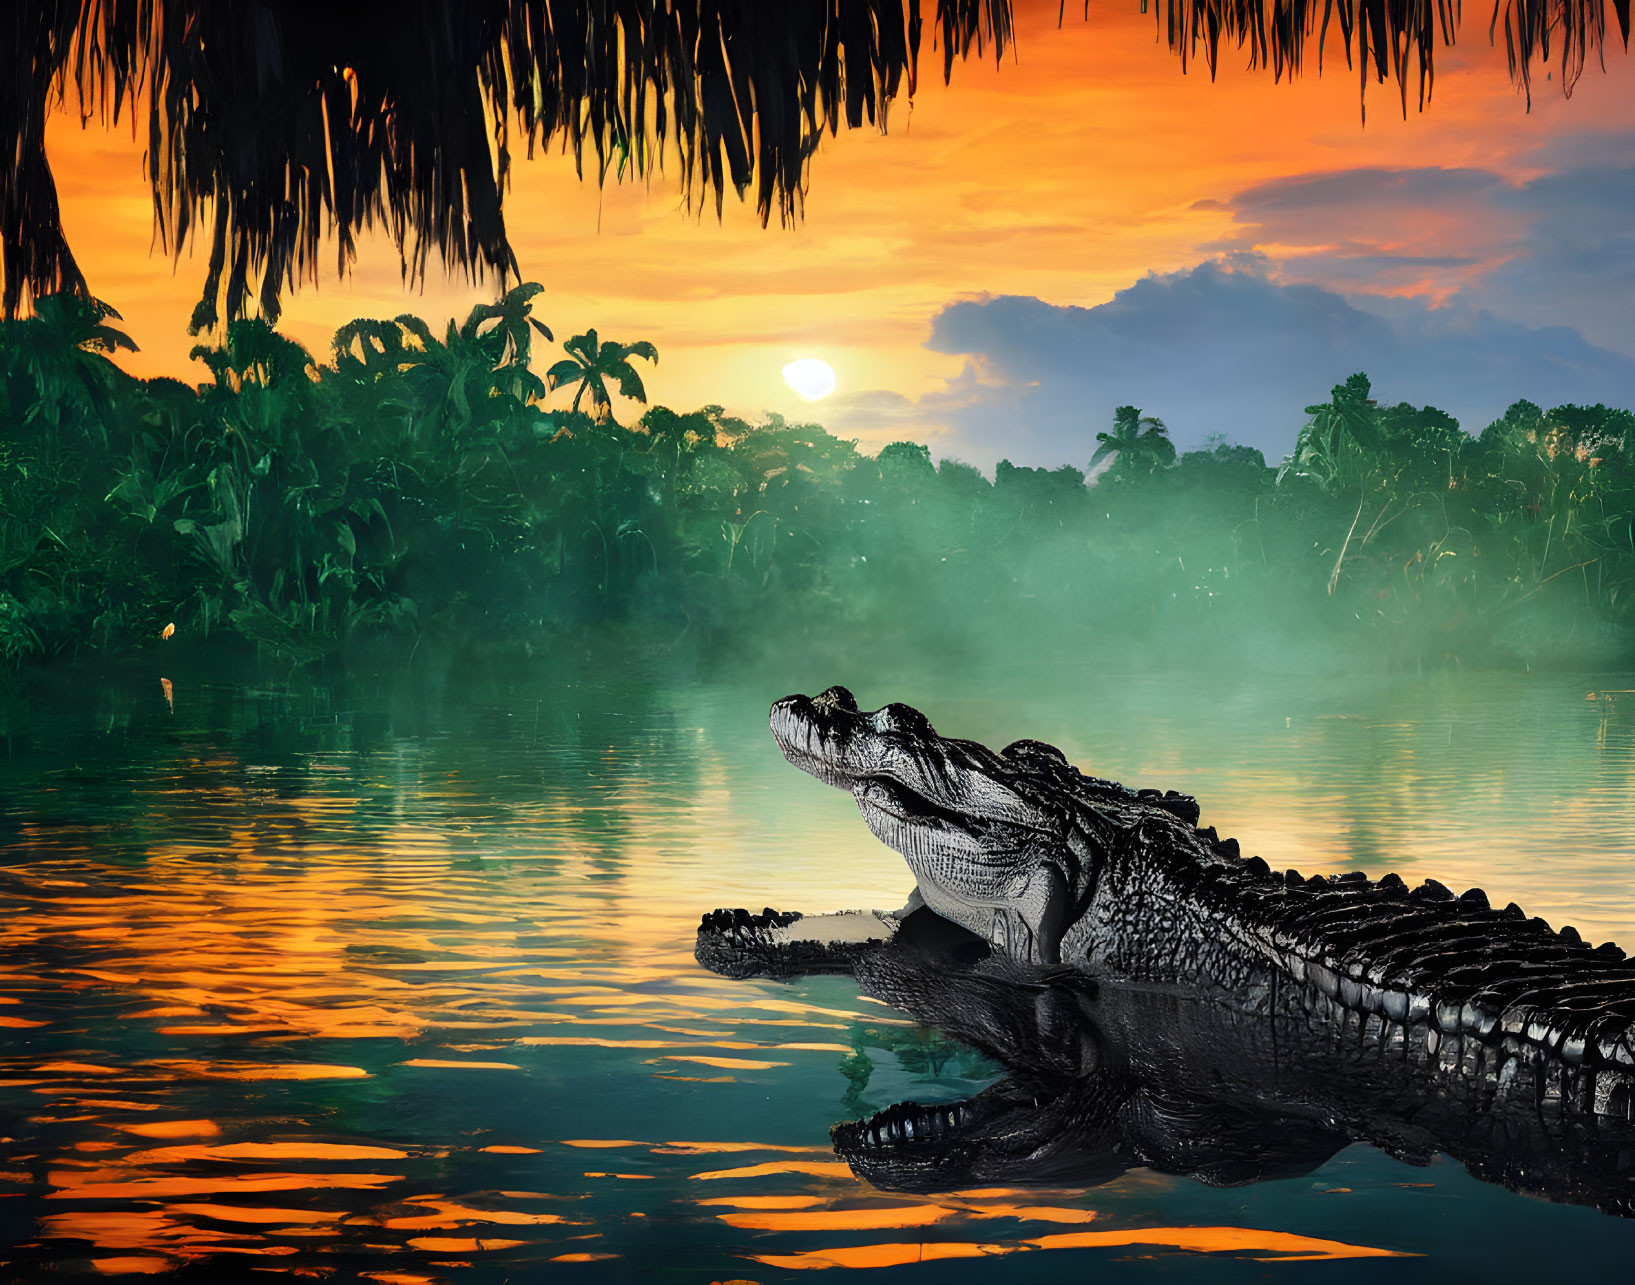 Crocodile emerging from river at sunset with lush jungle foliage.